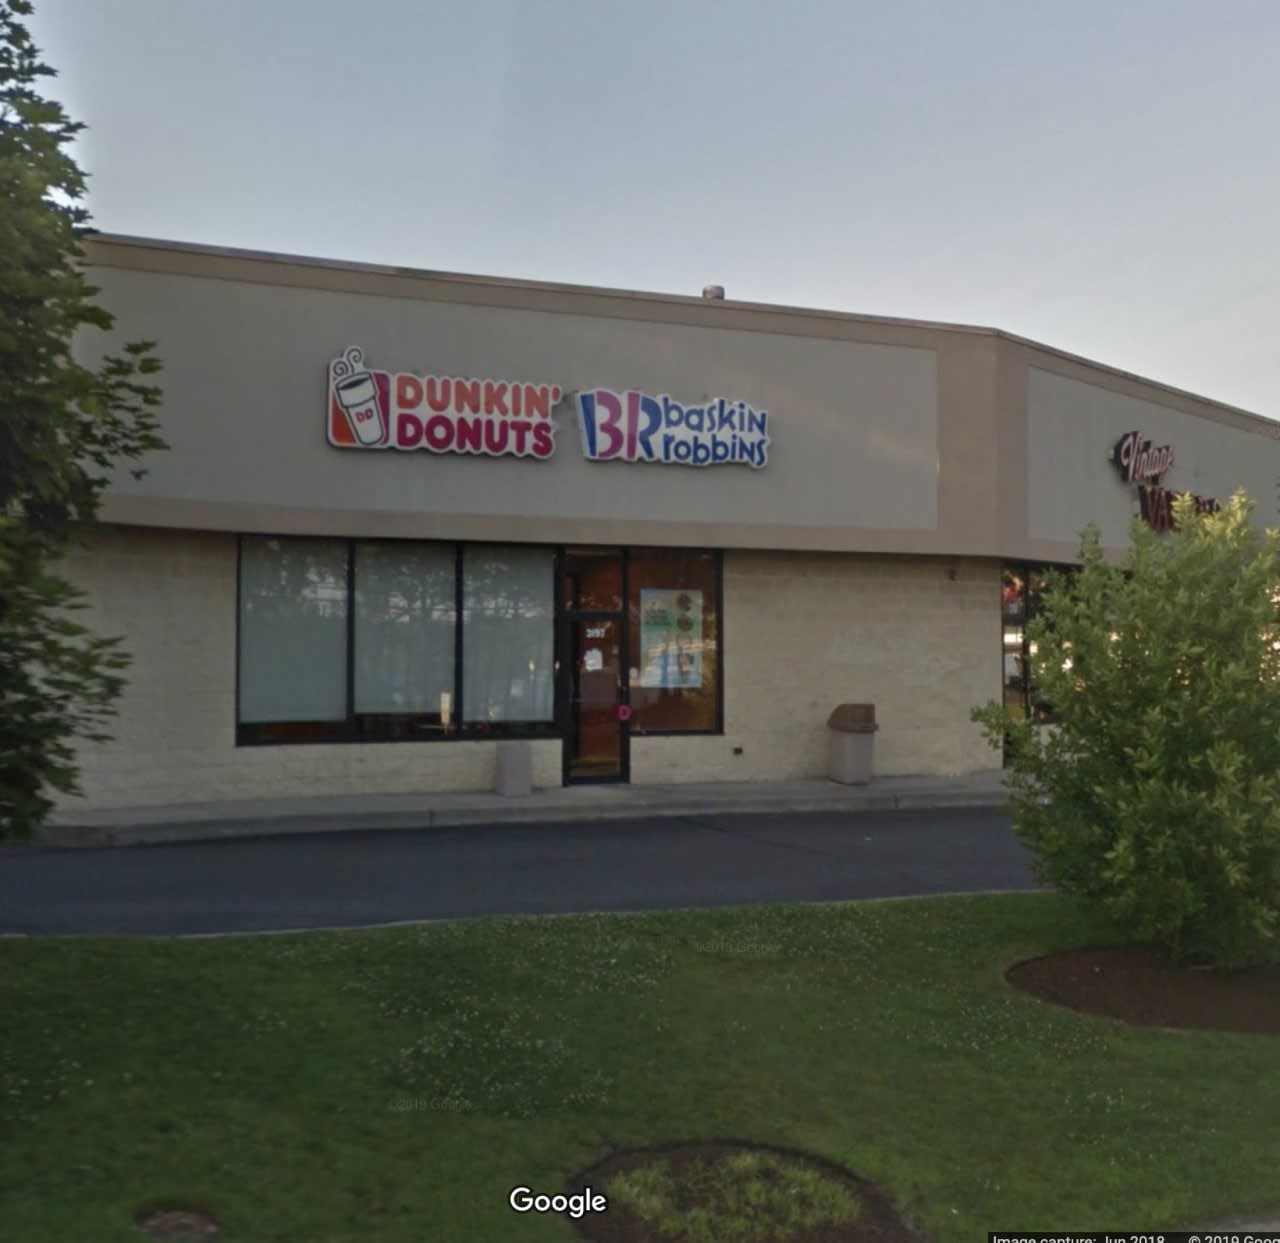 A man attempting to rob an area Dunkin' Donuts was stopped by Good Samaritans.